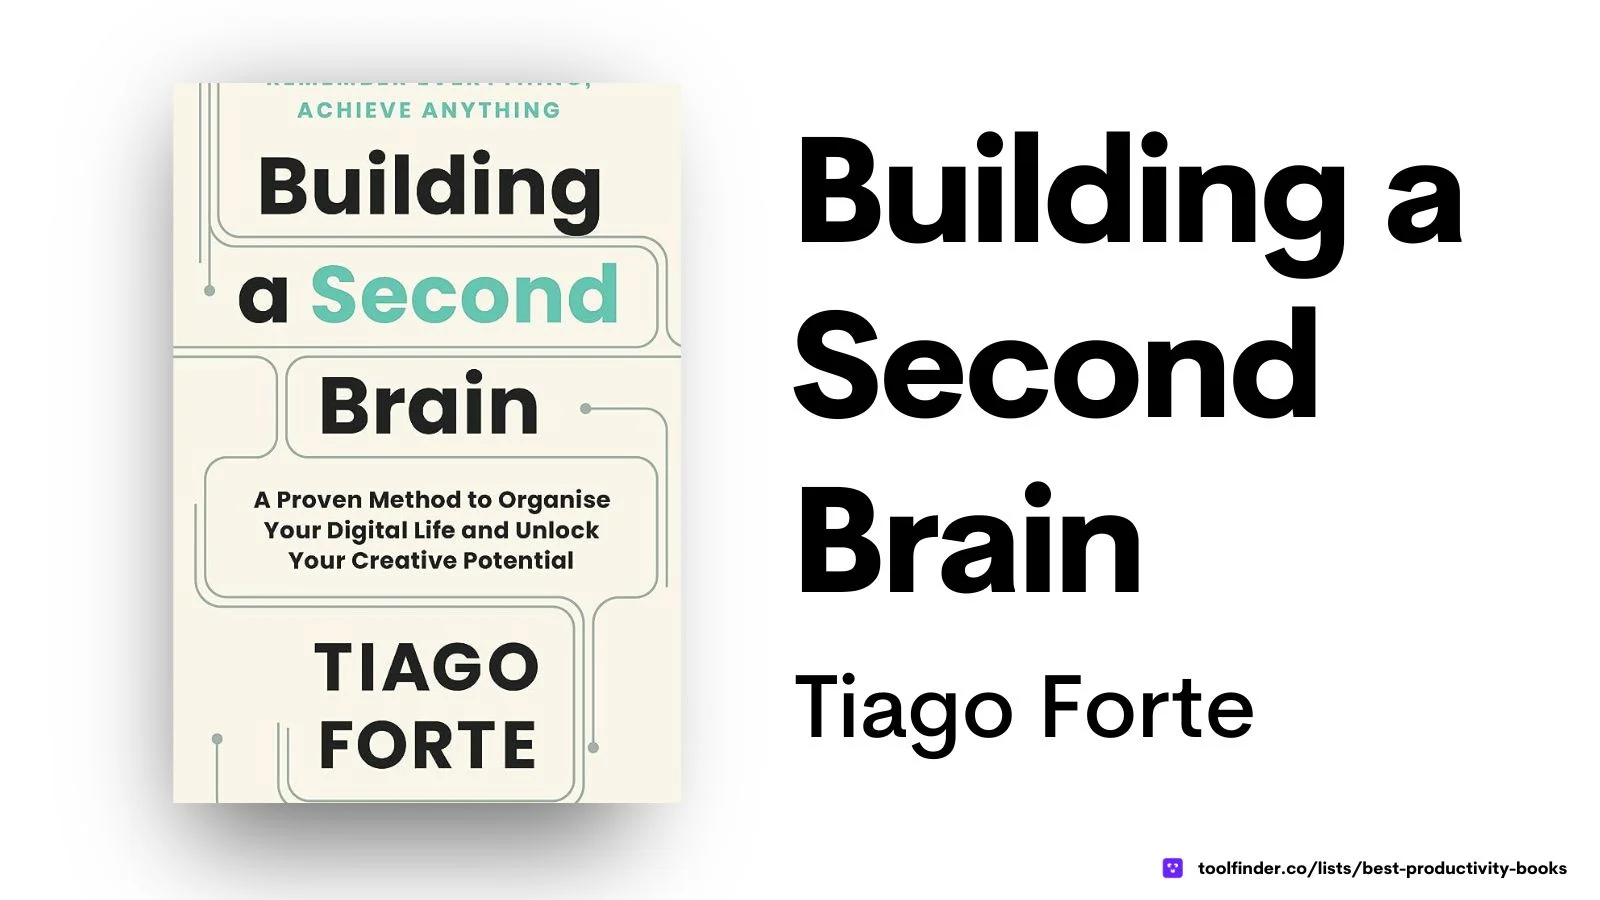 Building a Second Brain by Tiago forte teaches you how to manage your knowledge better.